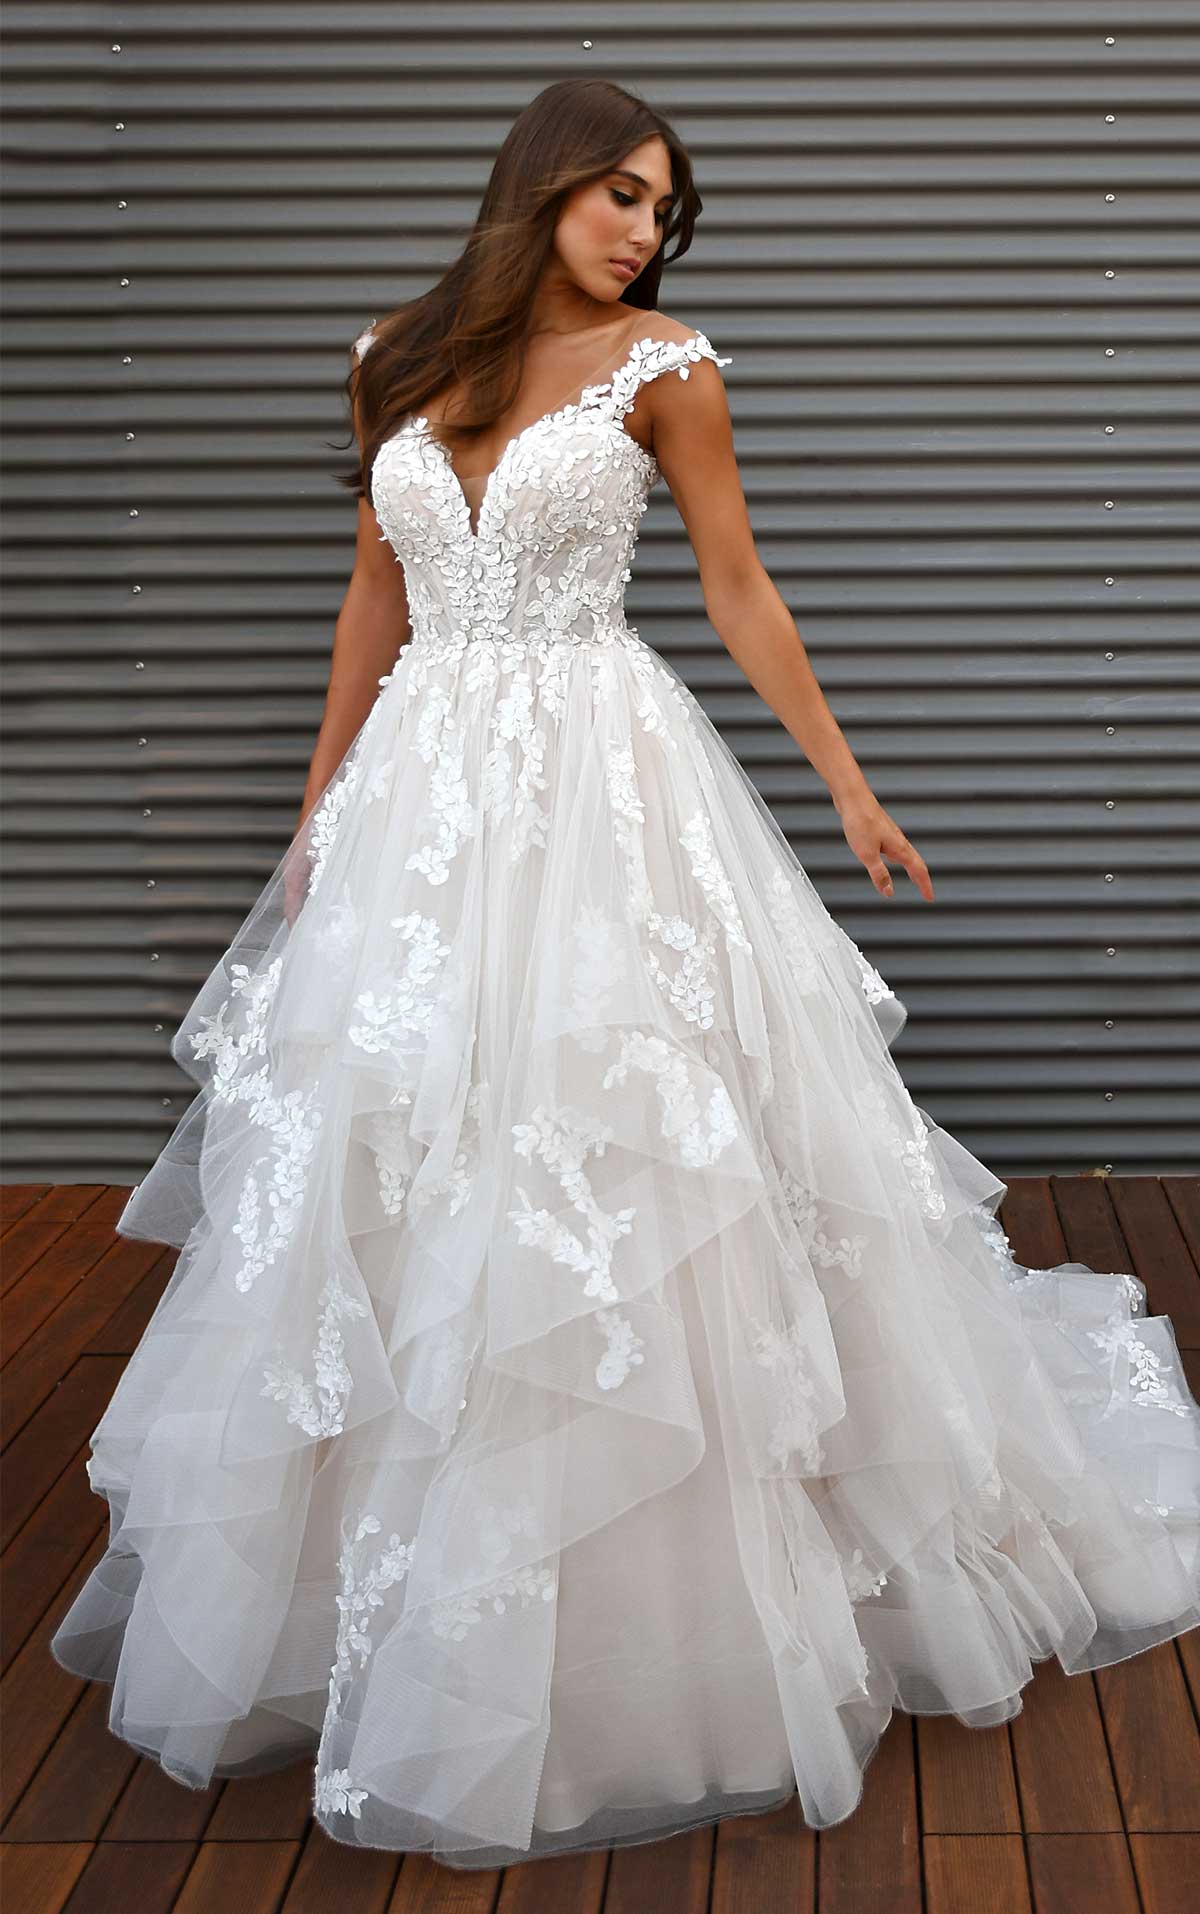 Bordeaux Strapless Lace Wedding Gown with Scallop Hem